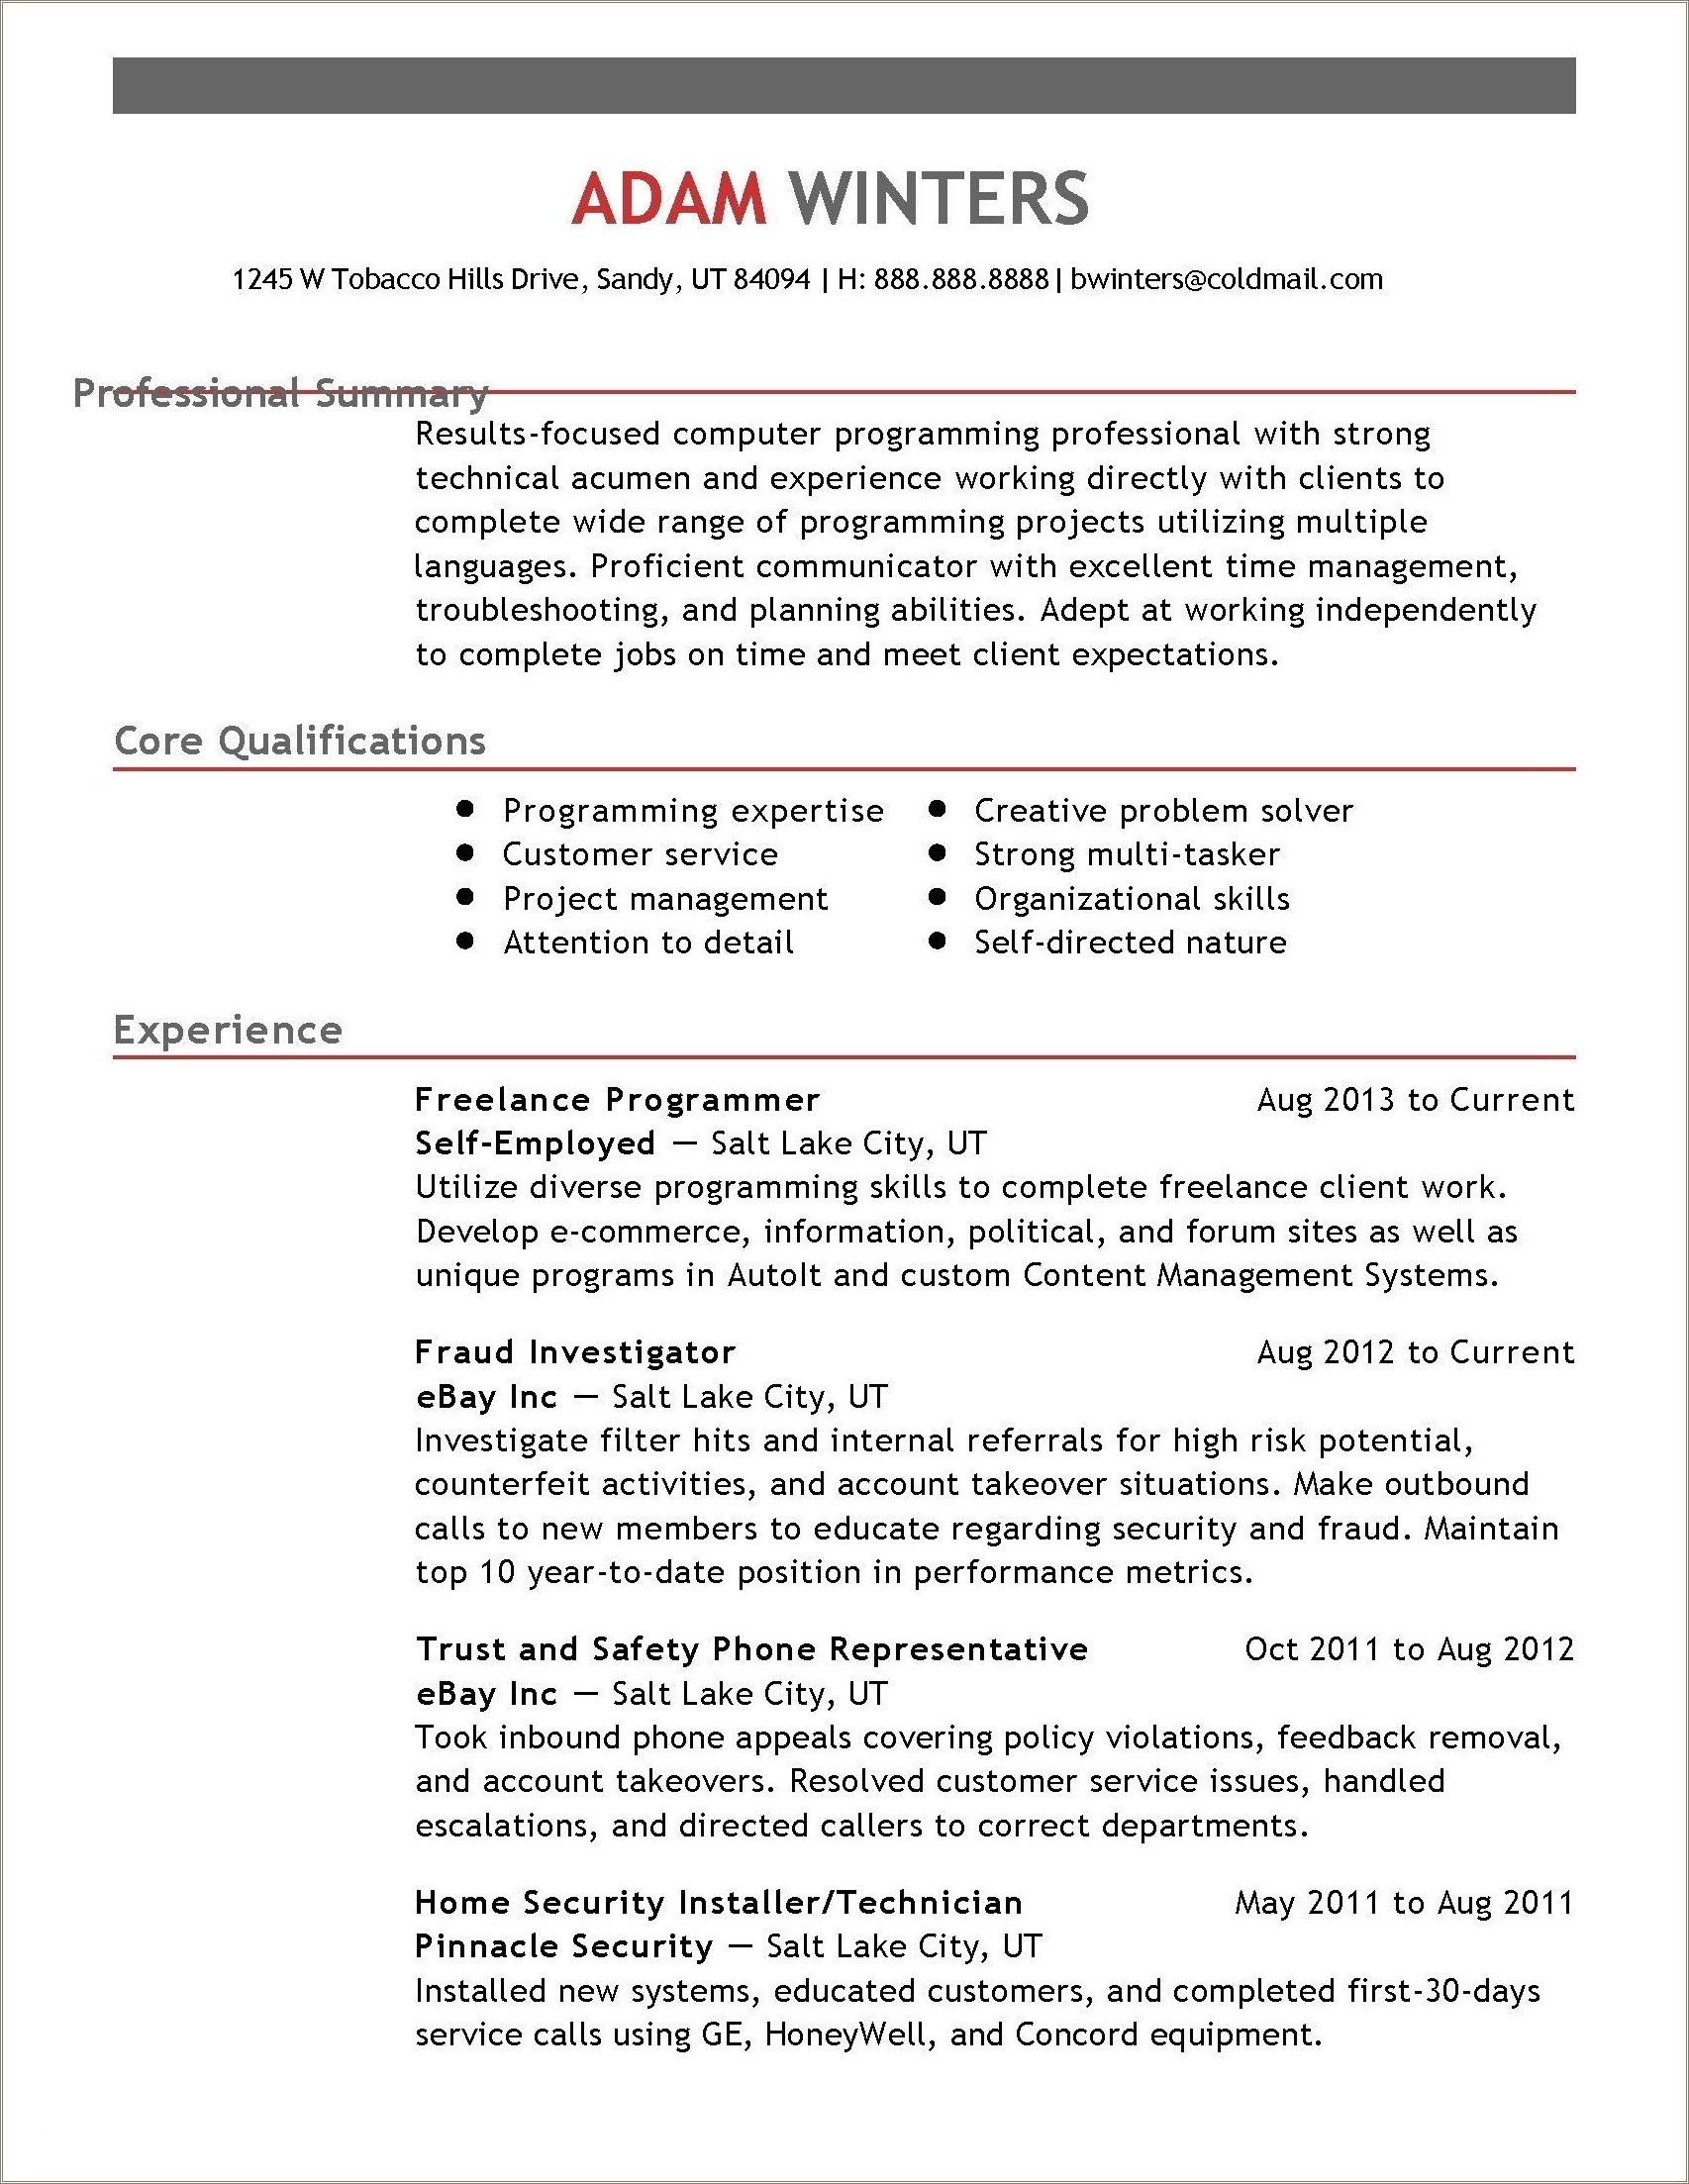 Working On The Summary Of A Resume